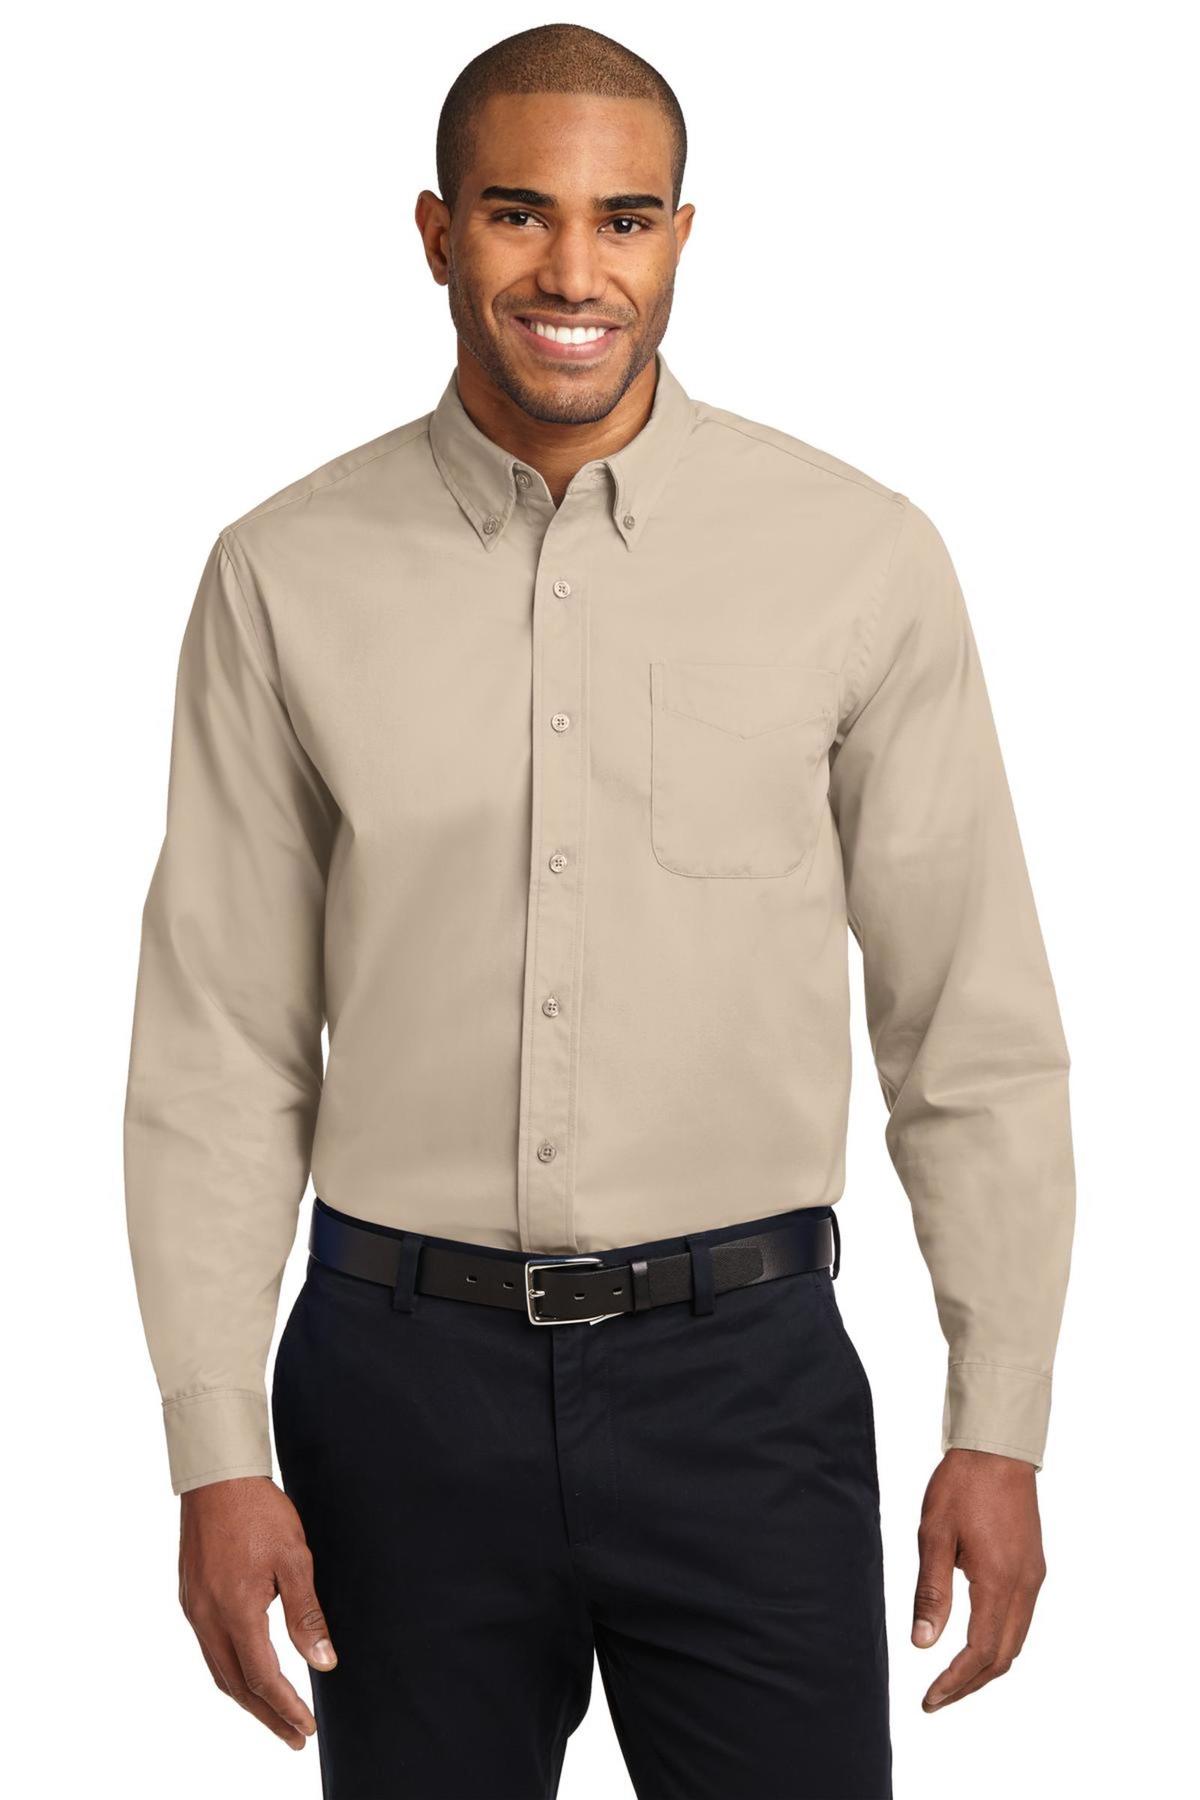  Daupanzees Men's Long Sleeve Embroidered Shirt Classic